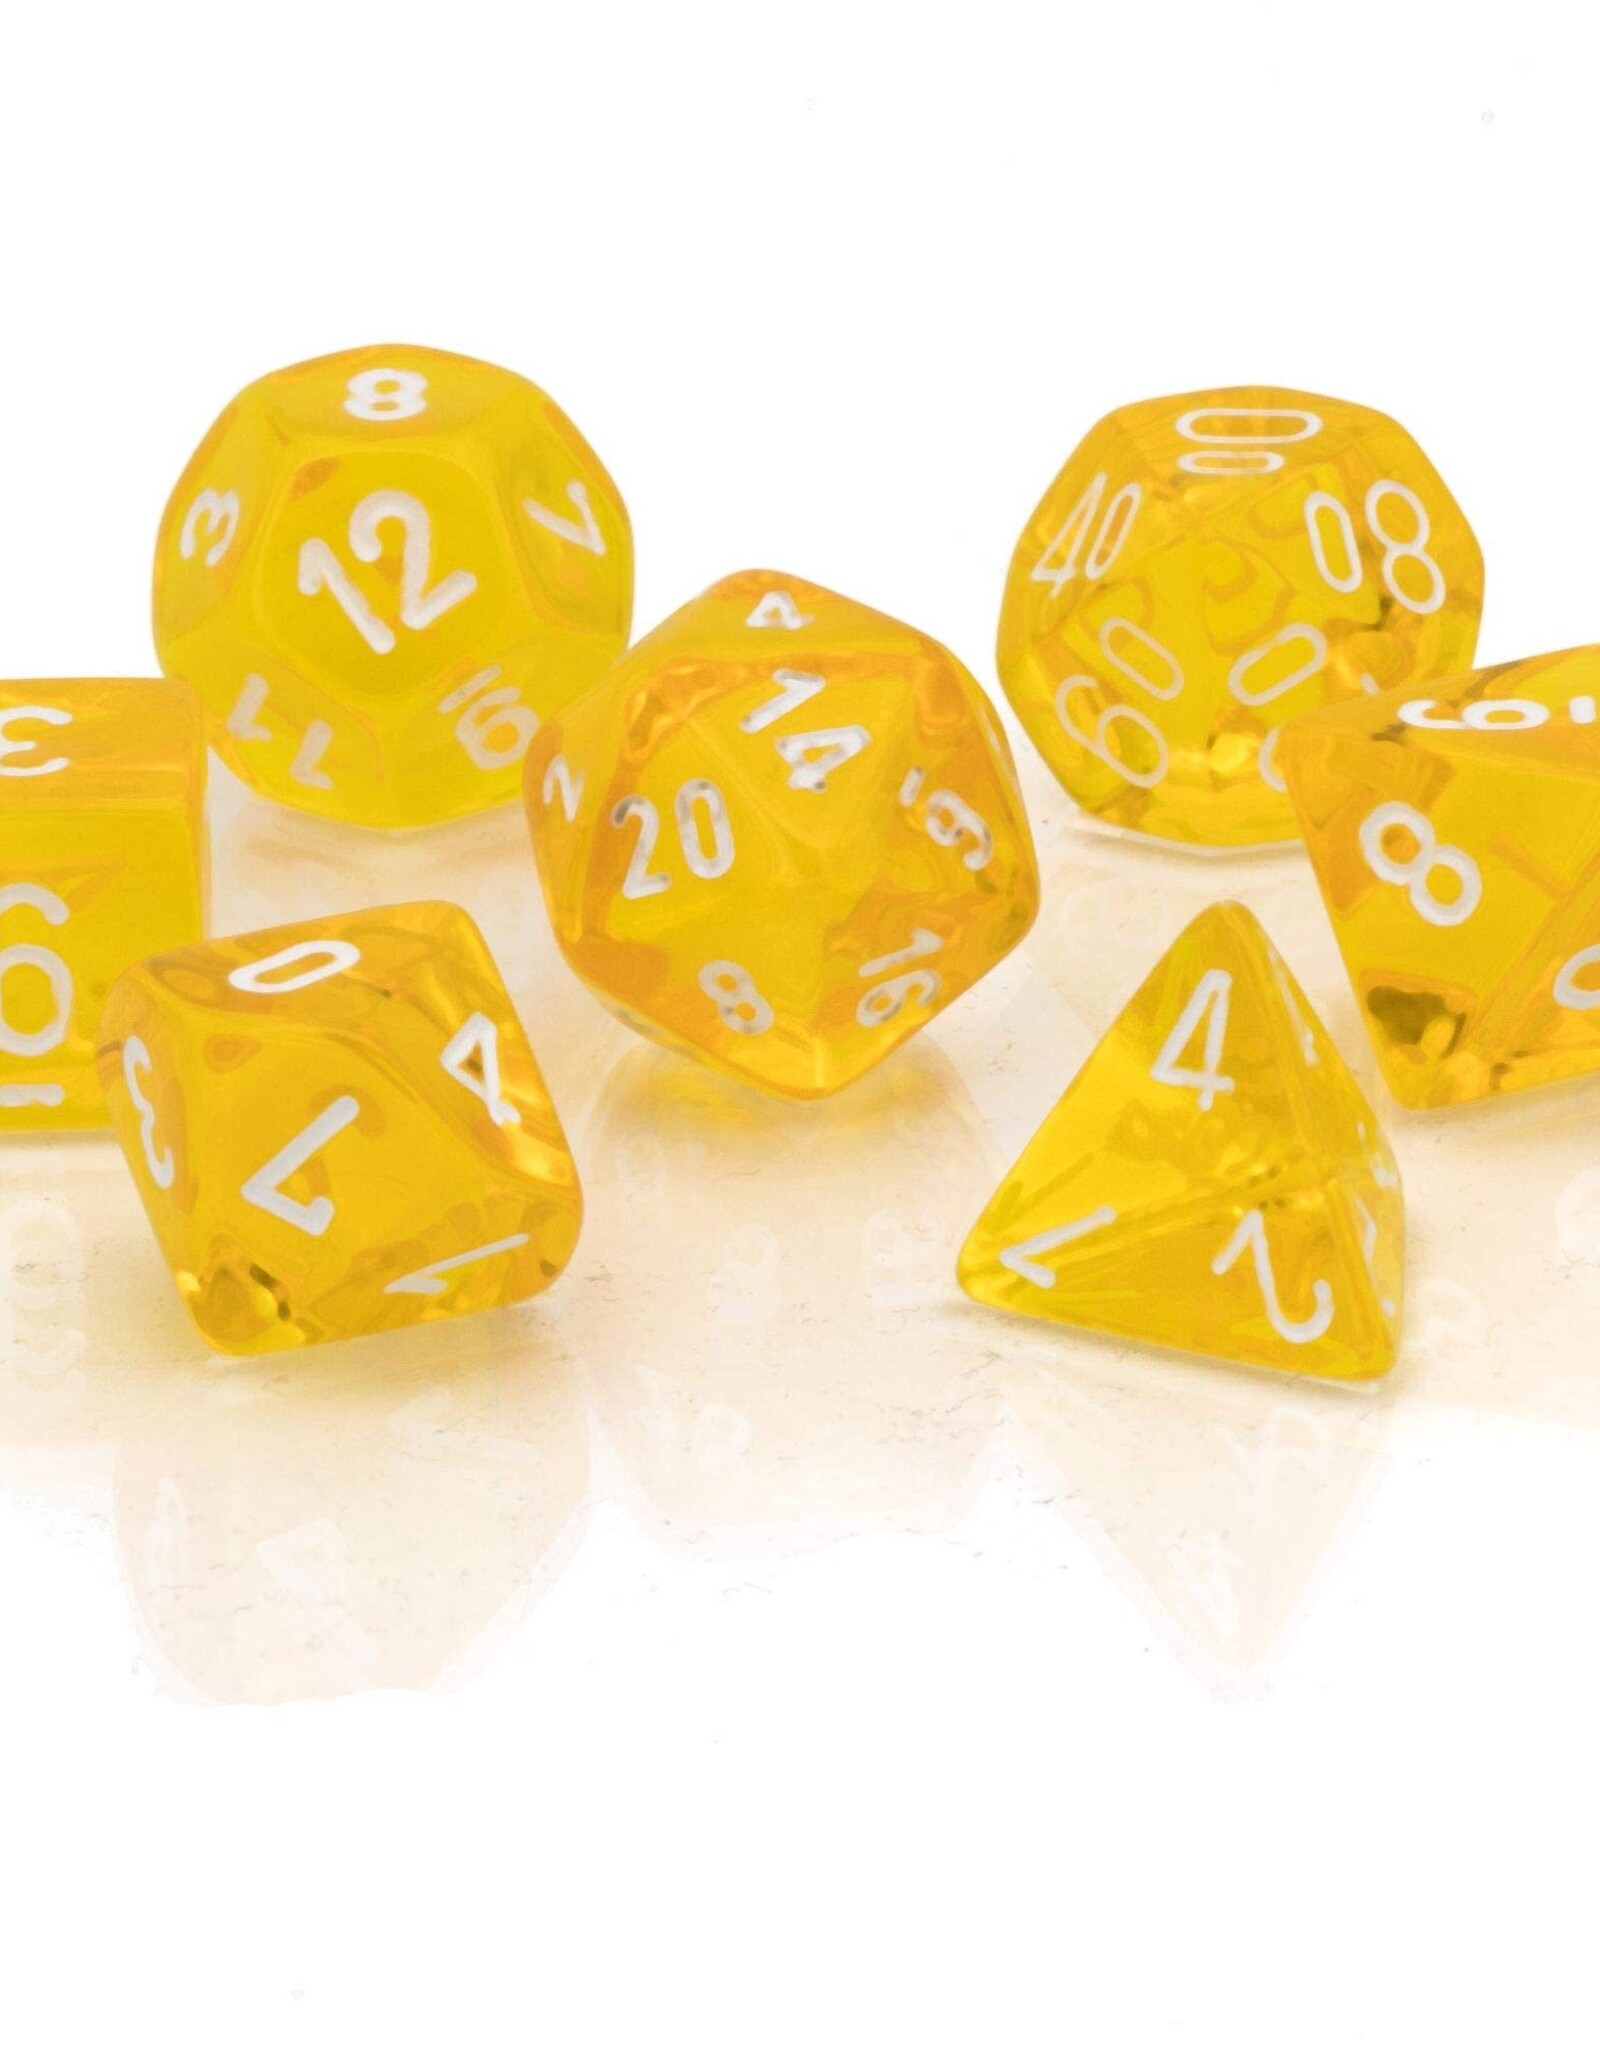 Chessex Dice - 7 pc Translucent Yellow/White Polyhedral